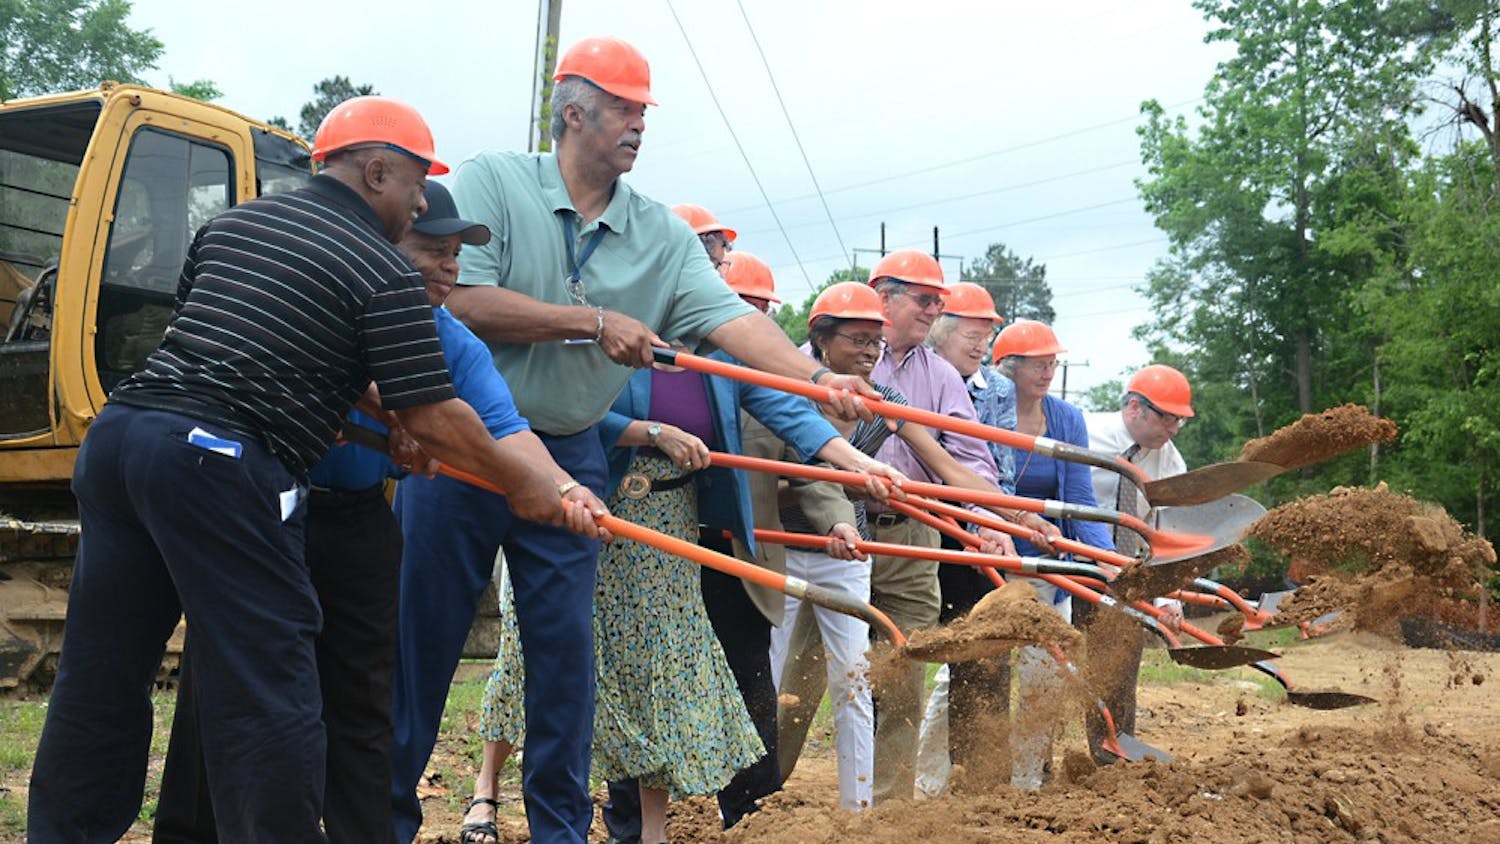 Leaders of the Orange County community break ground at the site of the new community building on Rogers Road.